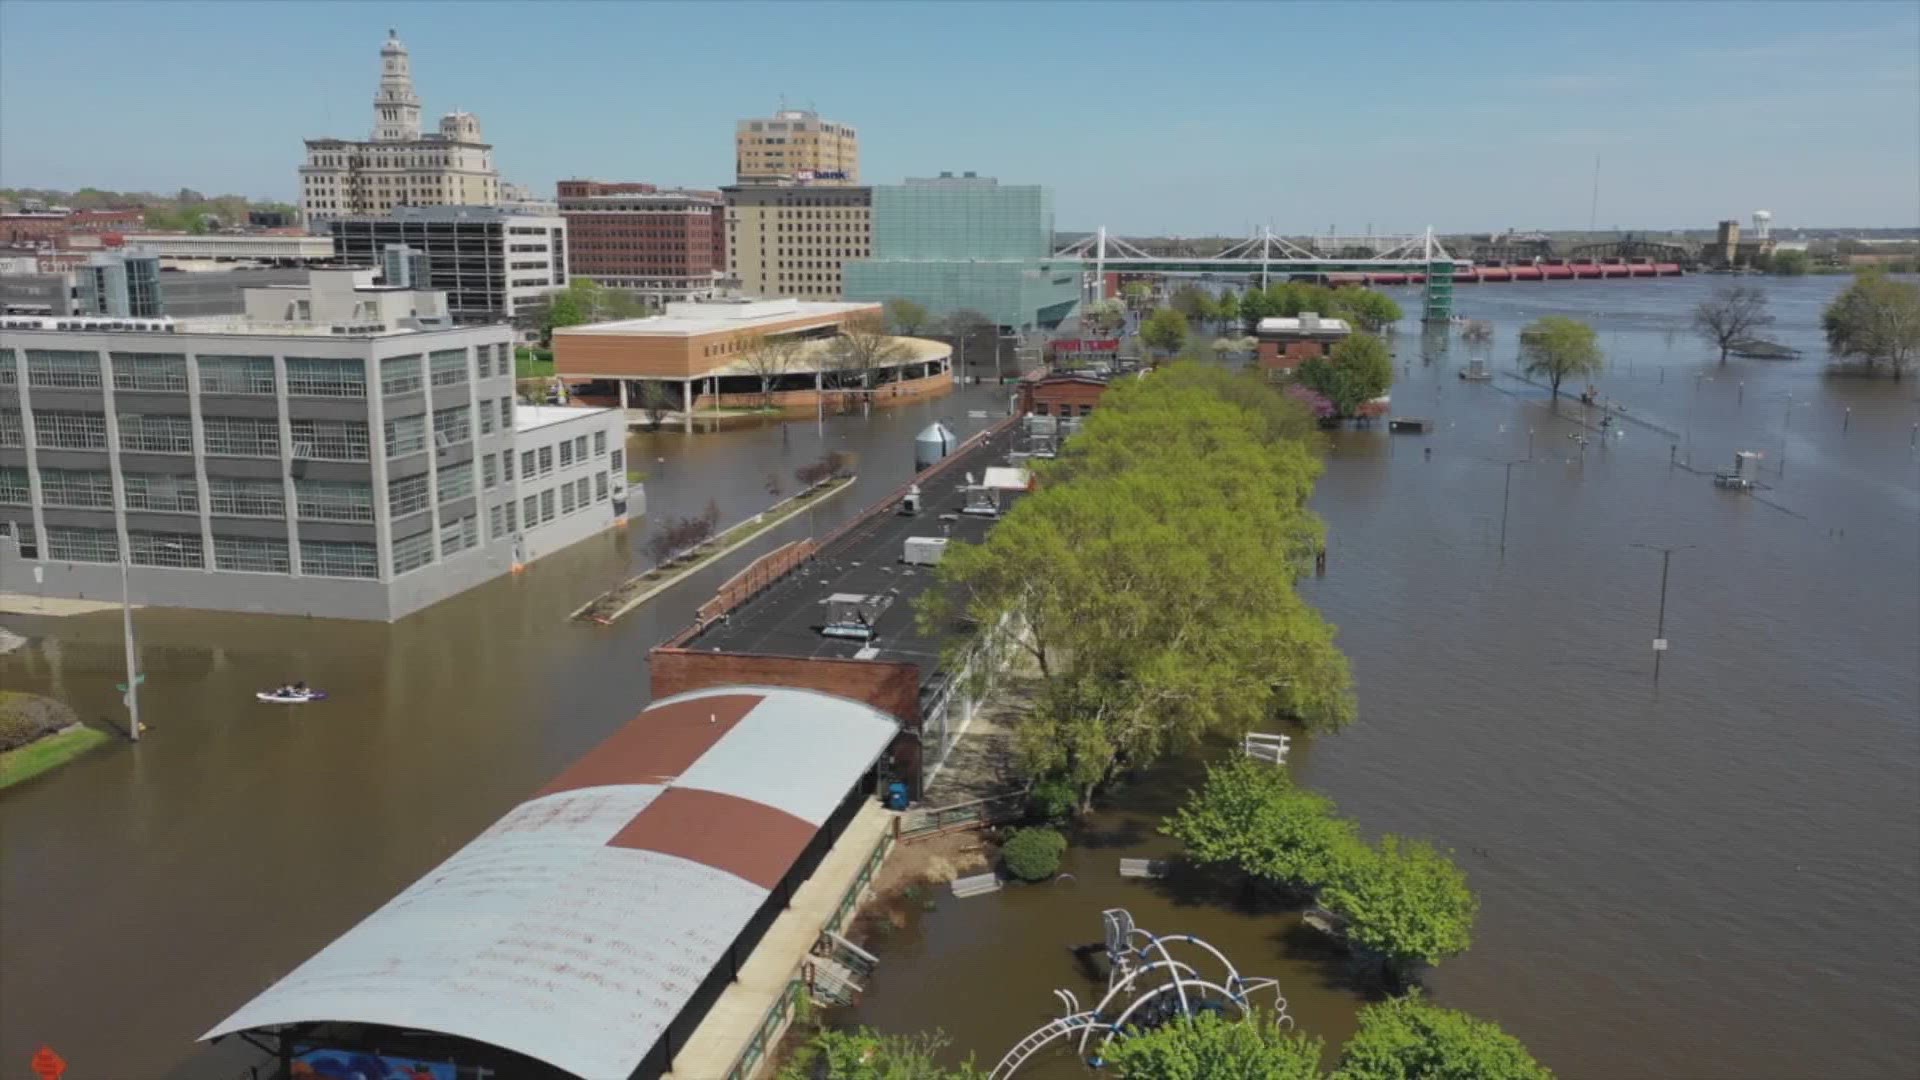 The National Weather Service says the Mississippi River remains at high likelihood of flooding during 2023. Here's how the city of Davenport is preparing.